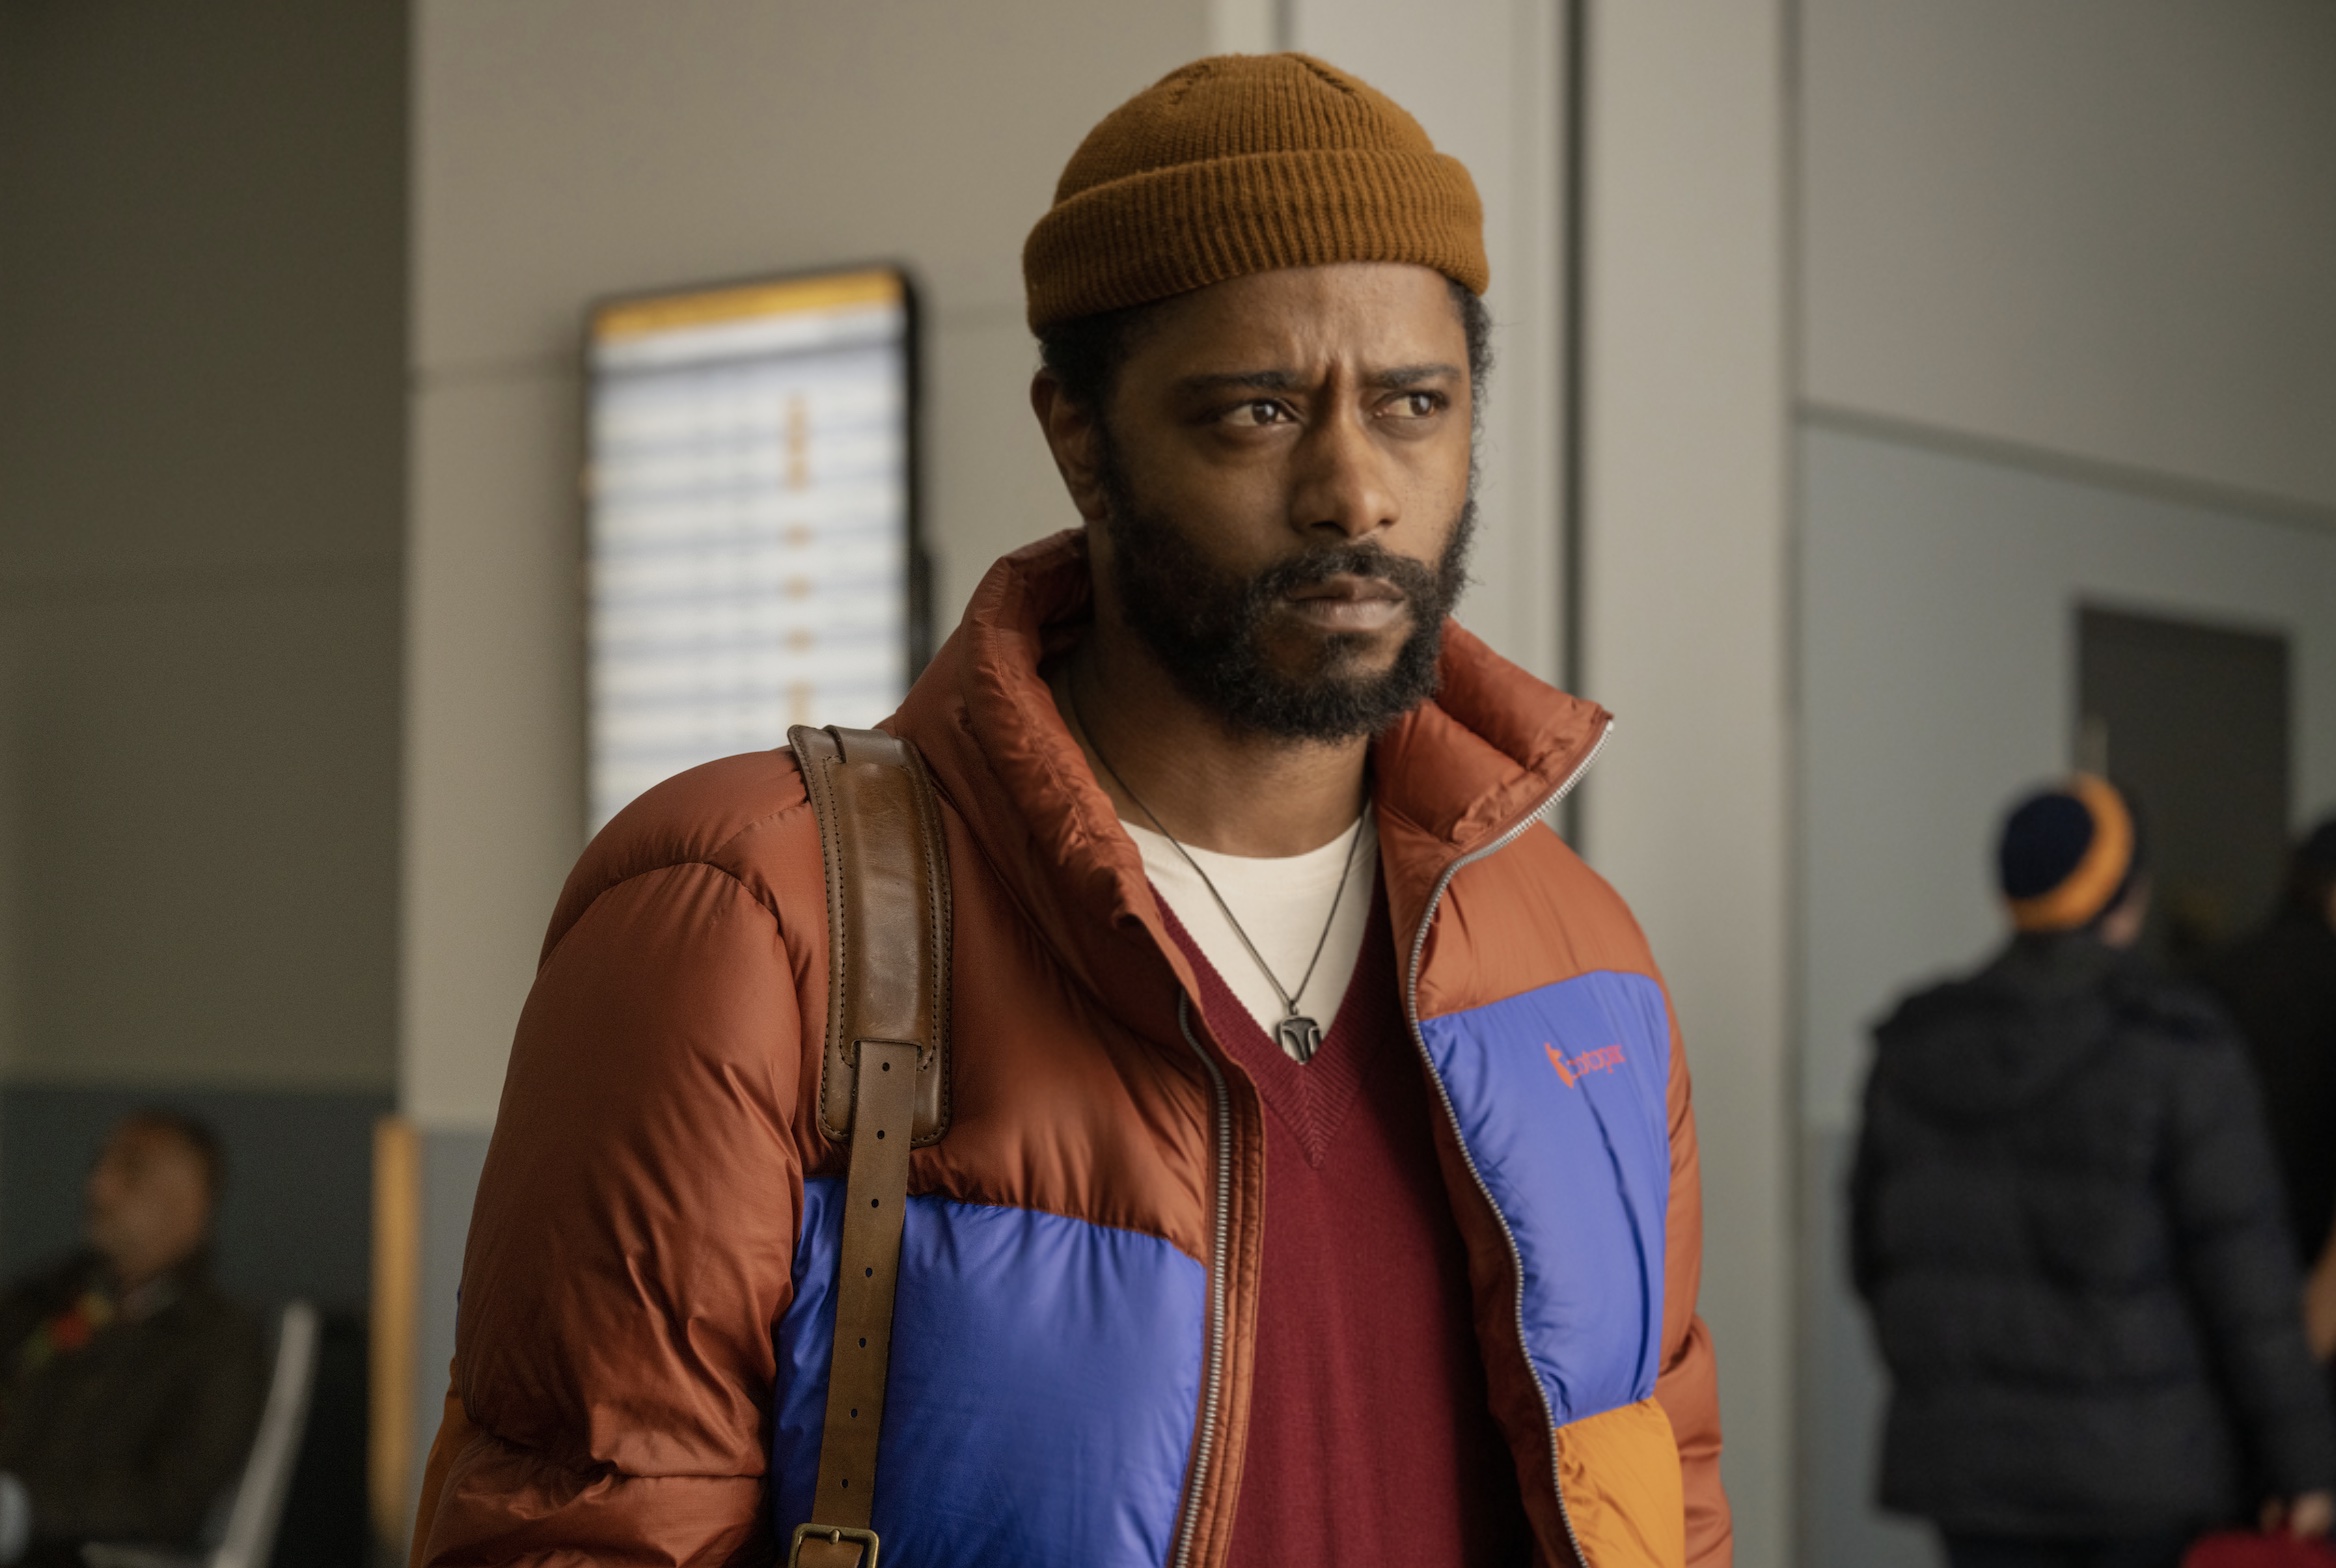 The Changeling Cast on Apple TV+ - LaKeith Stanfield as Apollo